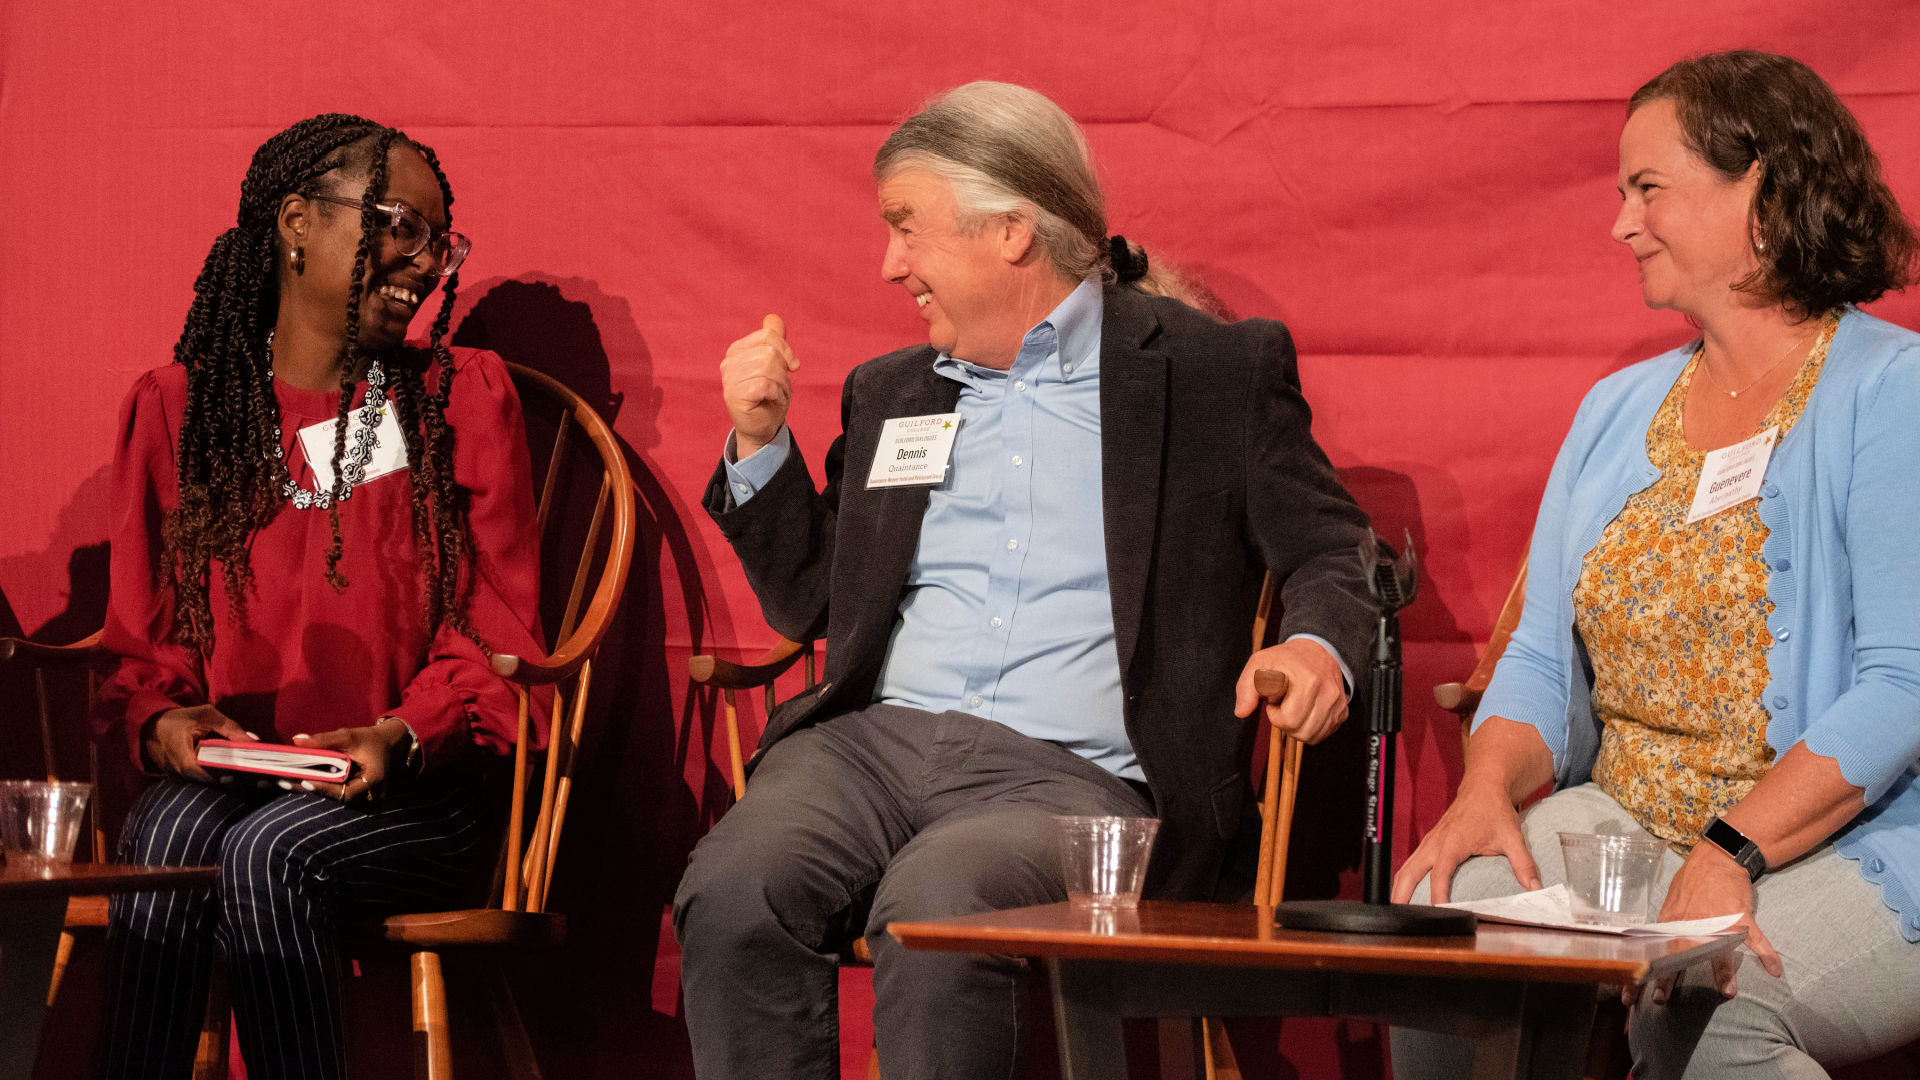 Seated on stage at the Guilford Dialogues are, from left: Roodline Volcy, Dennis Quaintance, and Guenevere Abernathy.